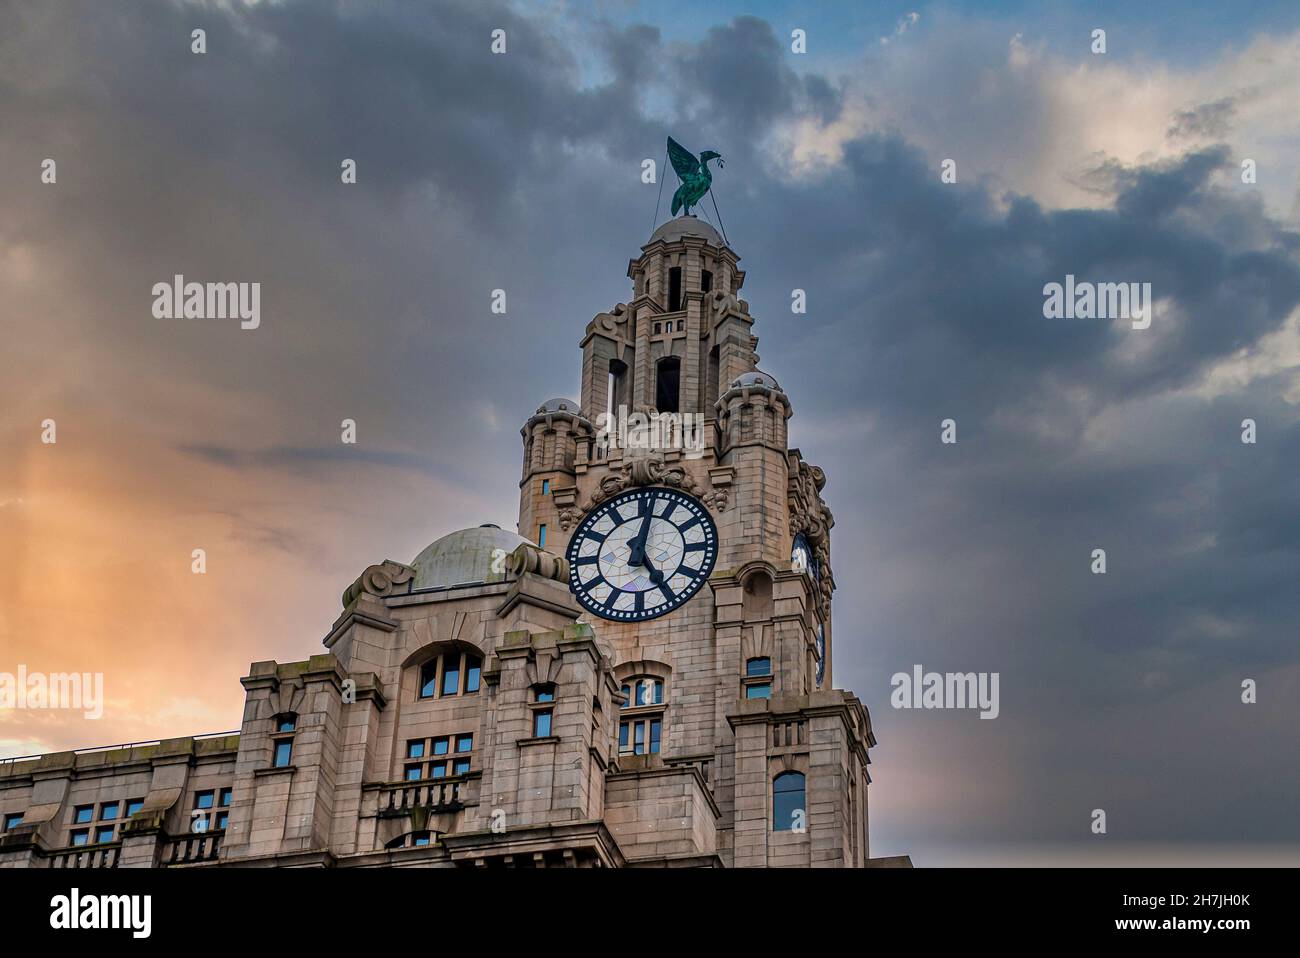 The Royal Liver Building with bird statue on dome against cloudy sky Stock Photo